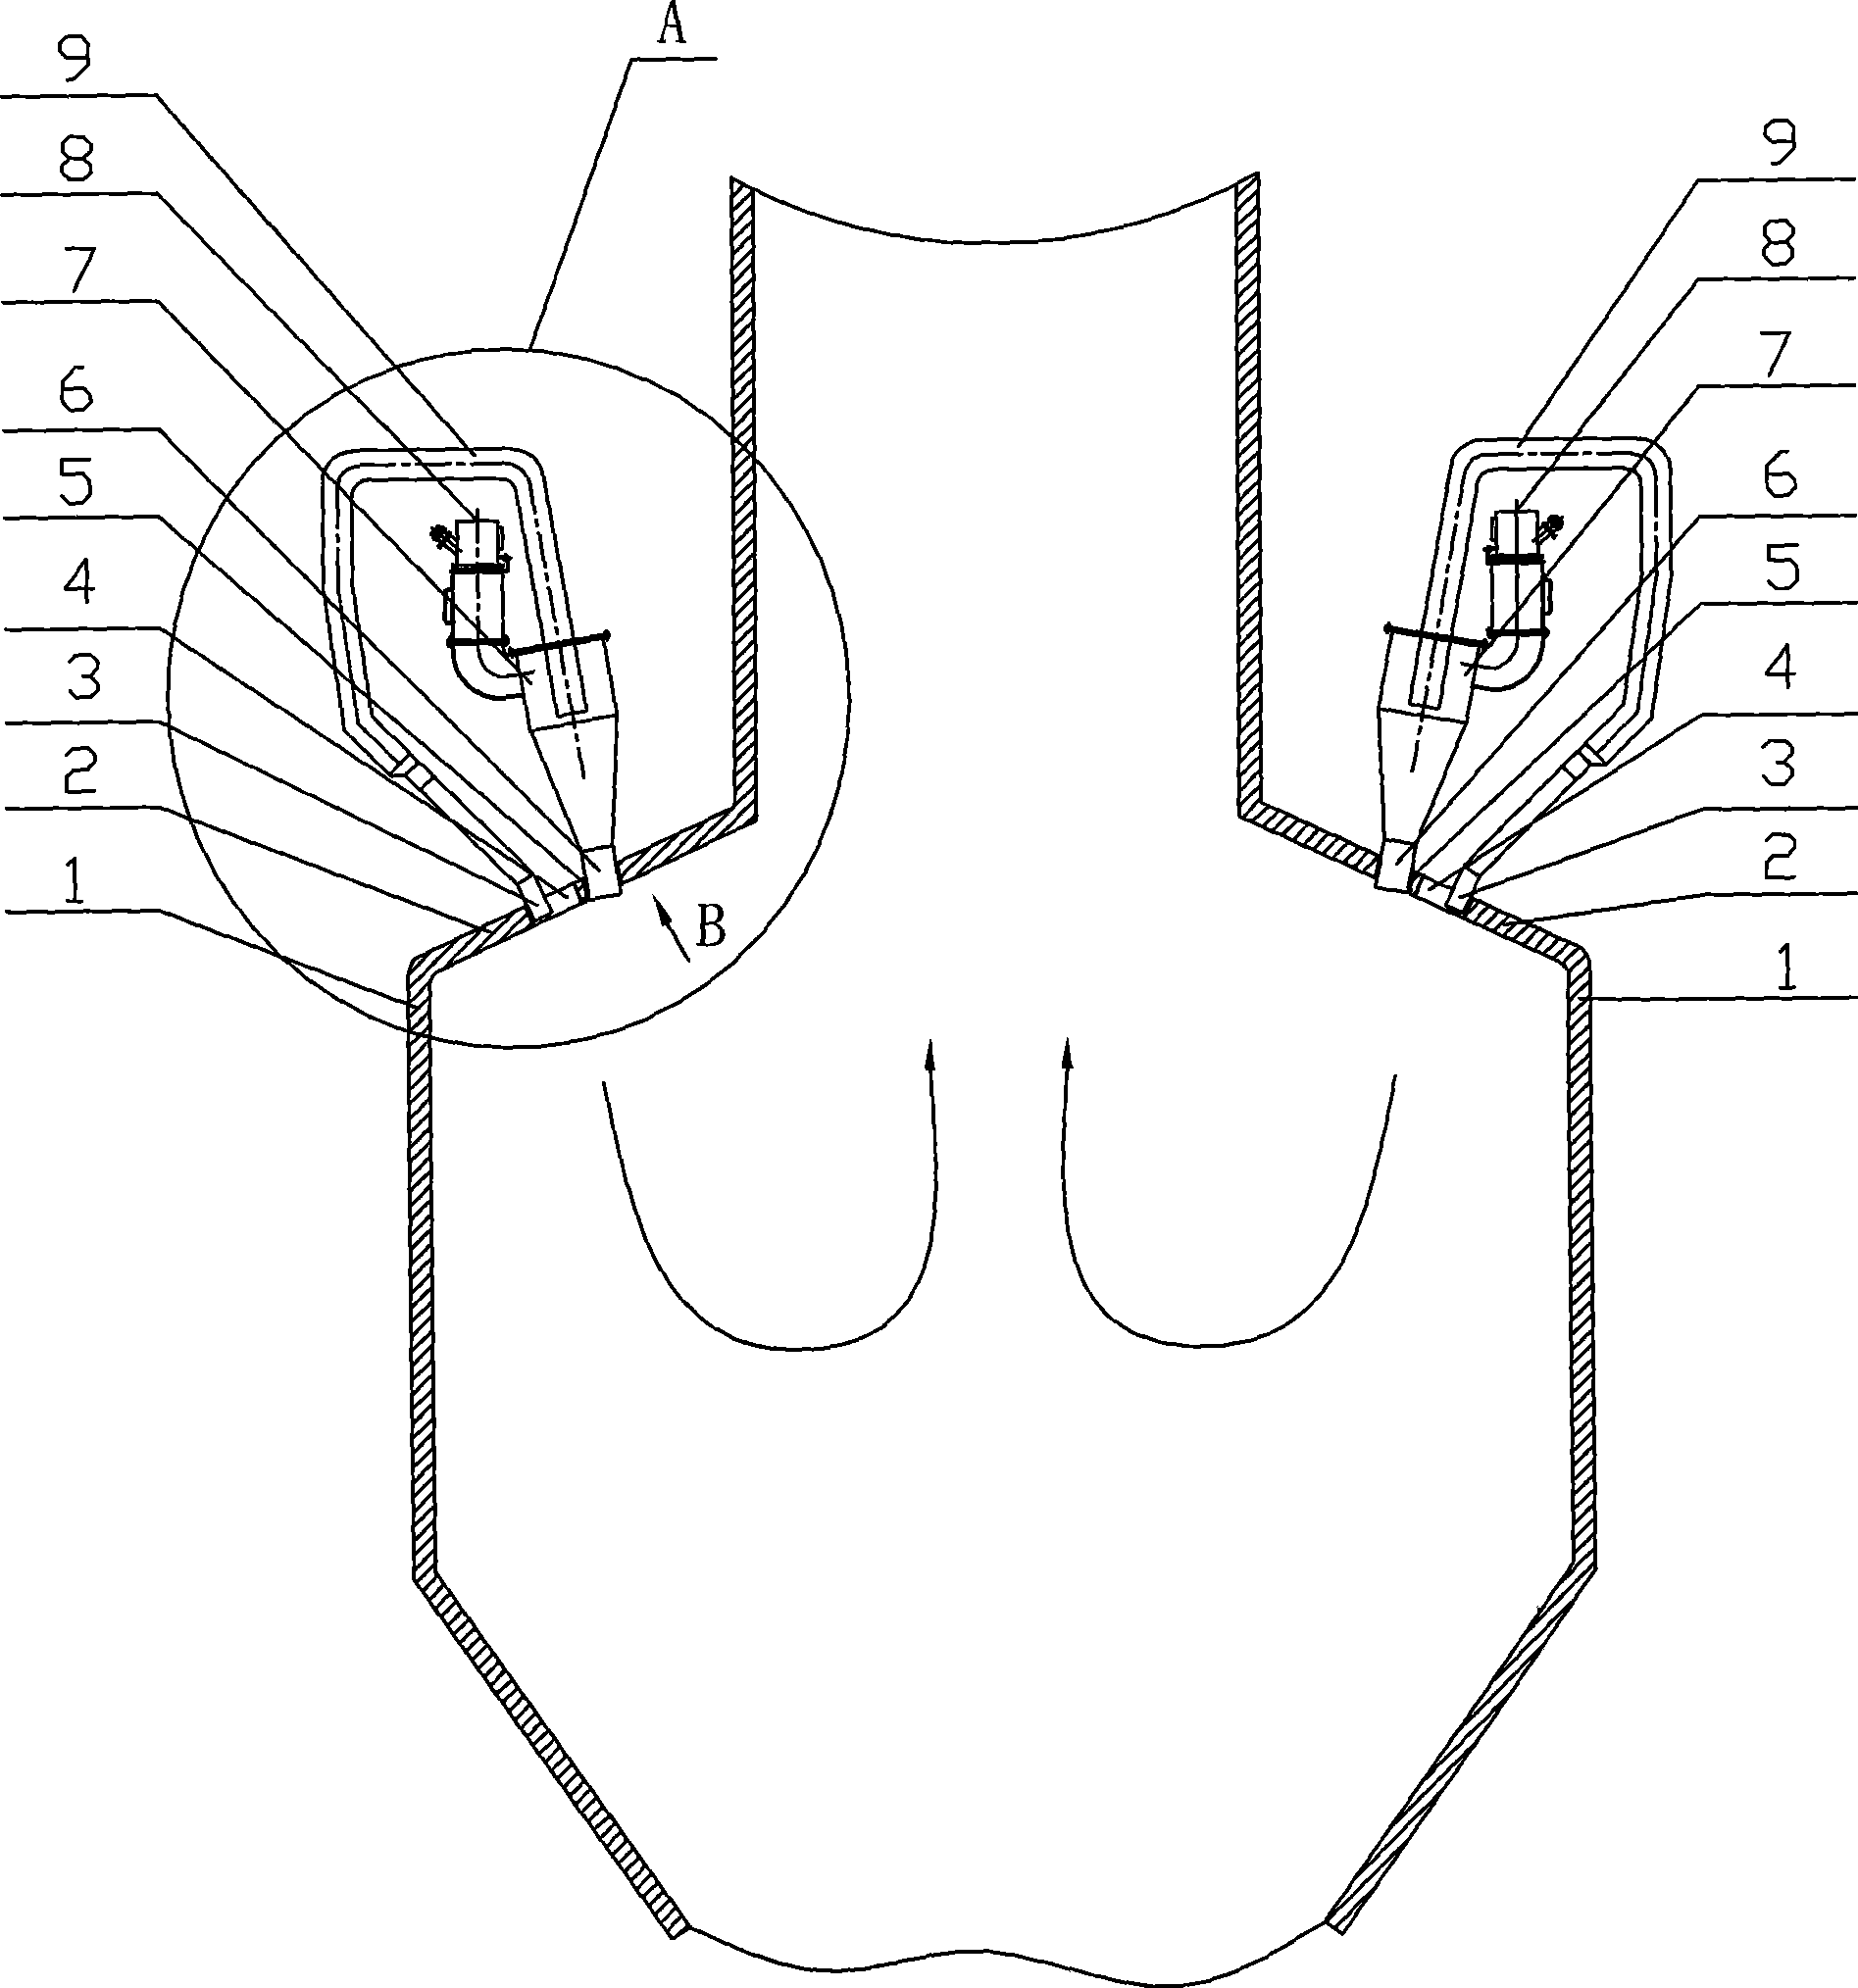 Combustion device with thin and thick breeze airflow stagger arrangement used for W-shaped flame furnace